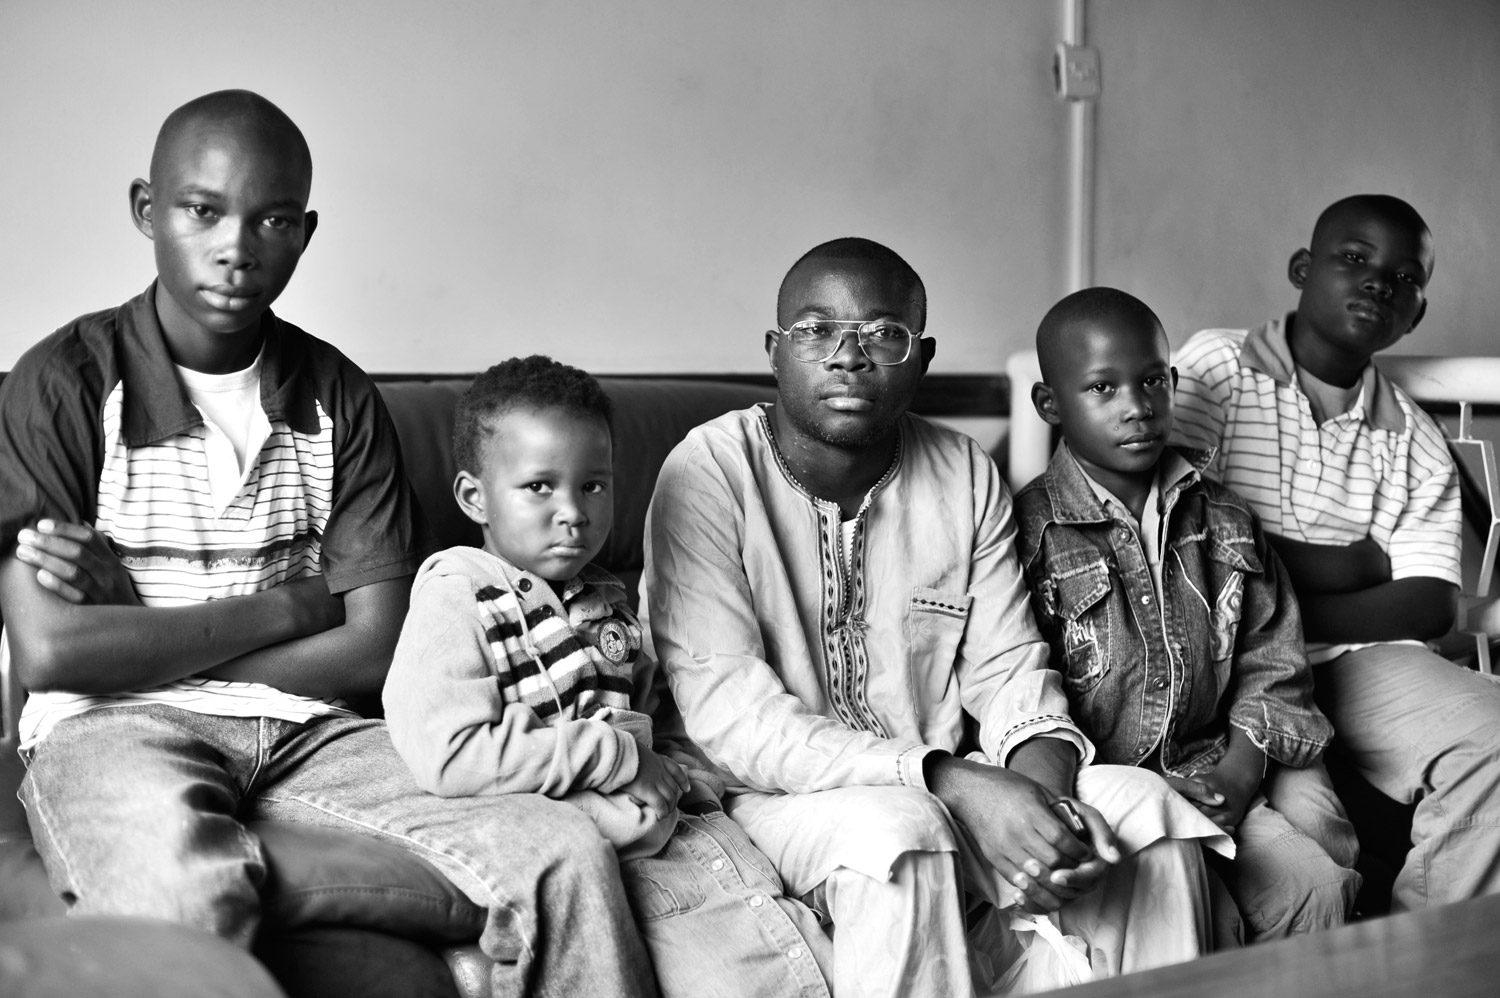 Pastor Marrion with his children in Nairobi two days after he was discharged from the hospital. Pictured are Rapha, 13; Karin Beuta, 3; Pastor Marrion; Jireh, 8; and Shalom, 11.